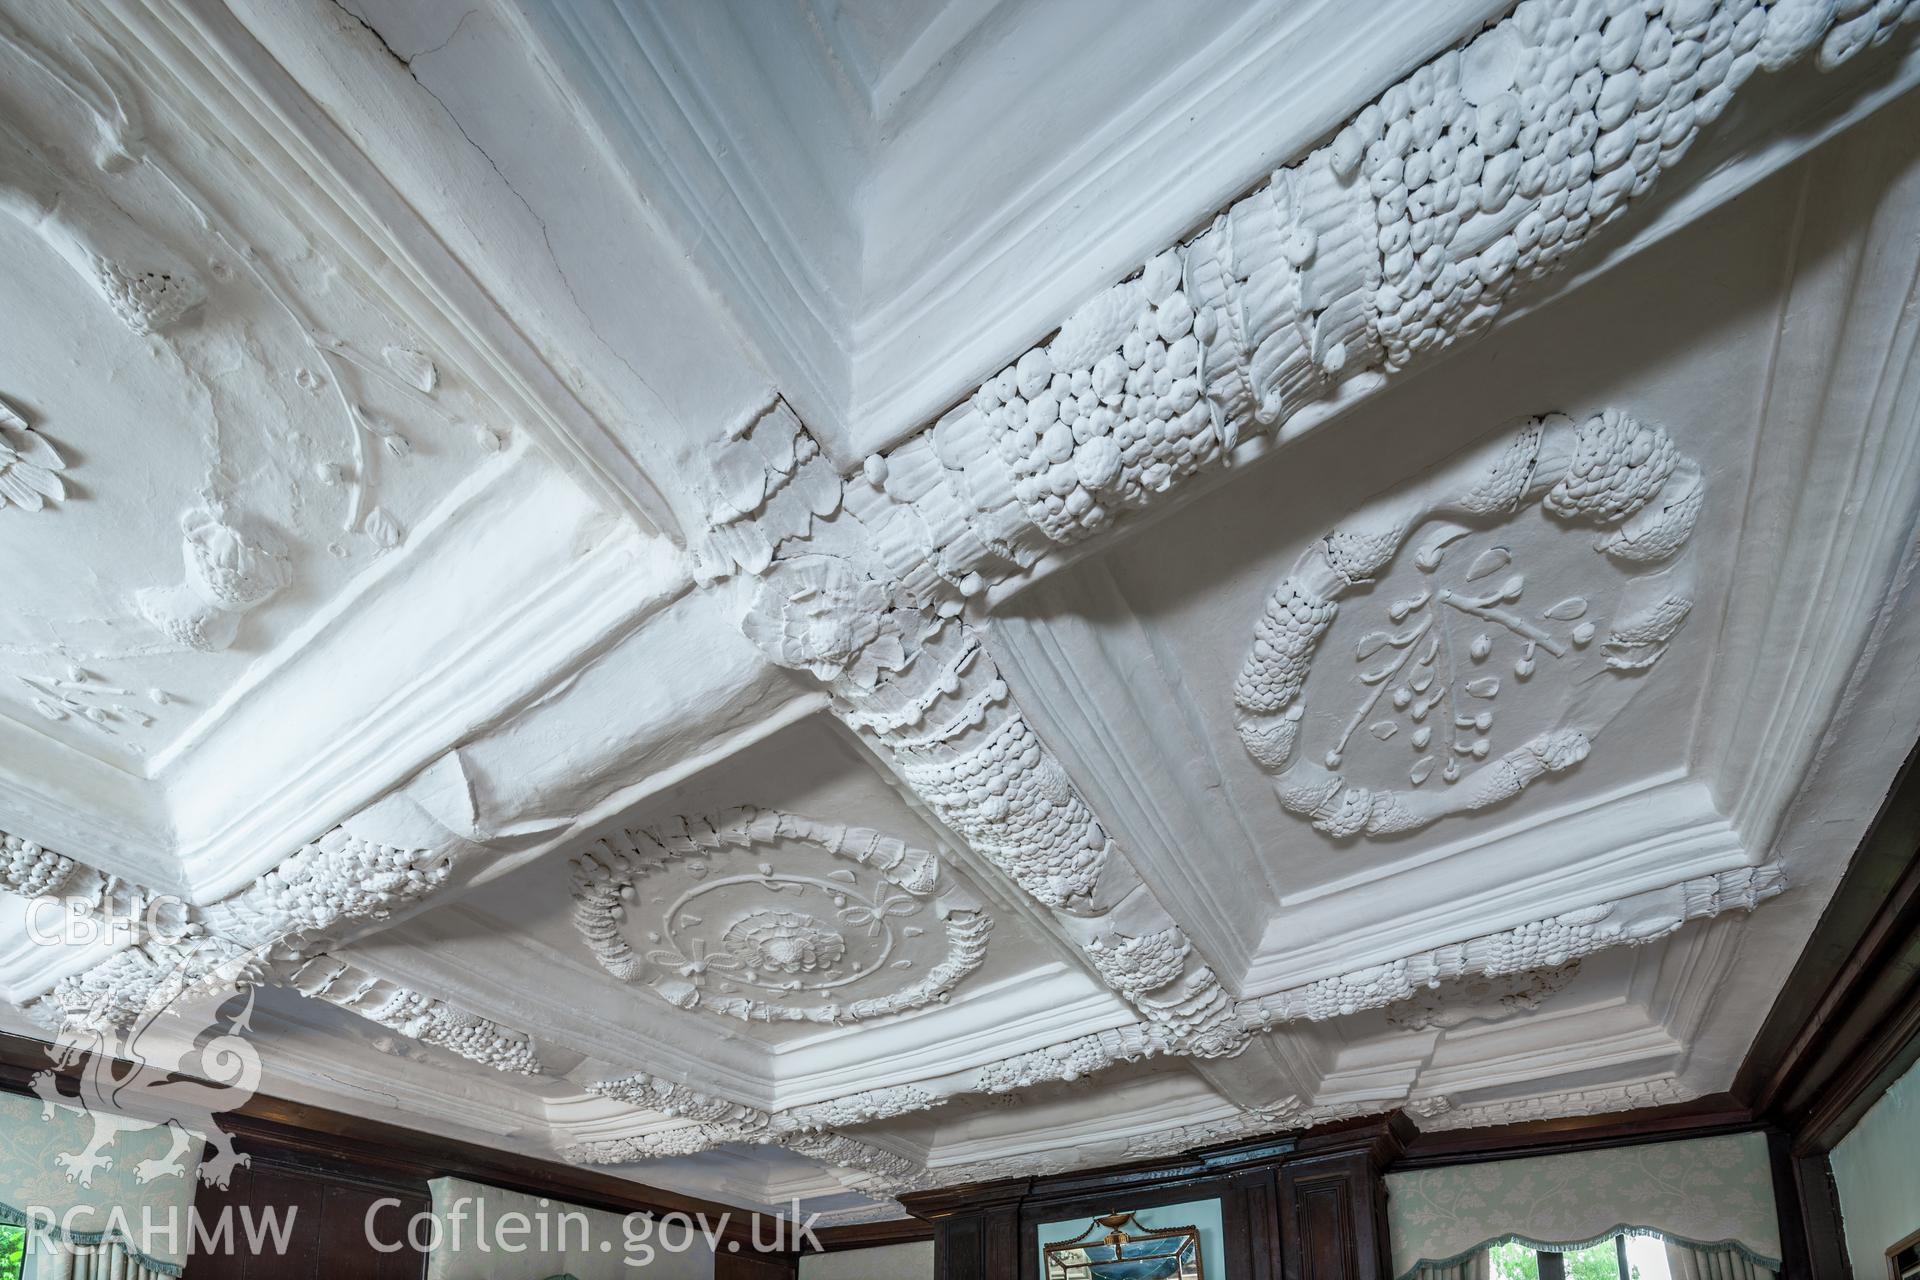 Interior of parlour with decorated plaster ceiling, detail.